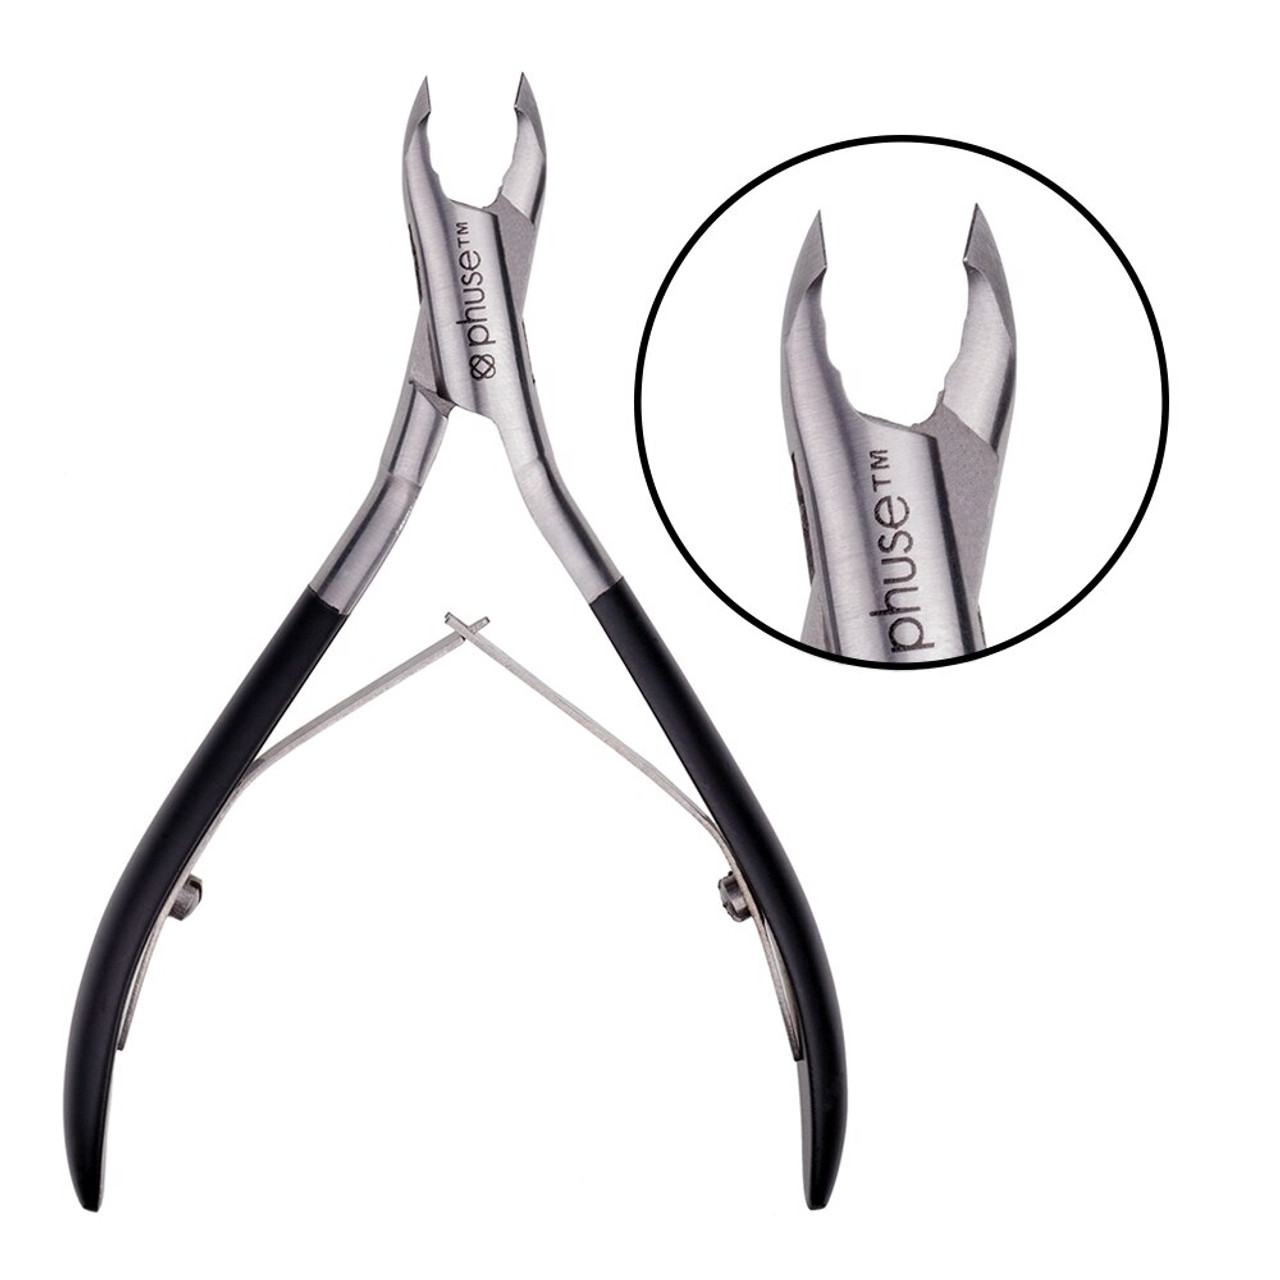 Stainless Steel Nippers